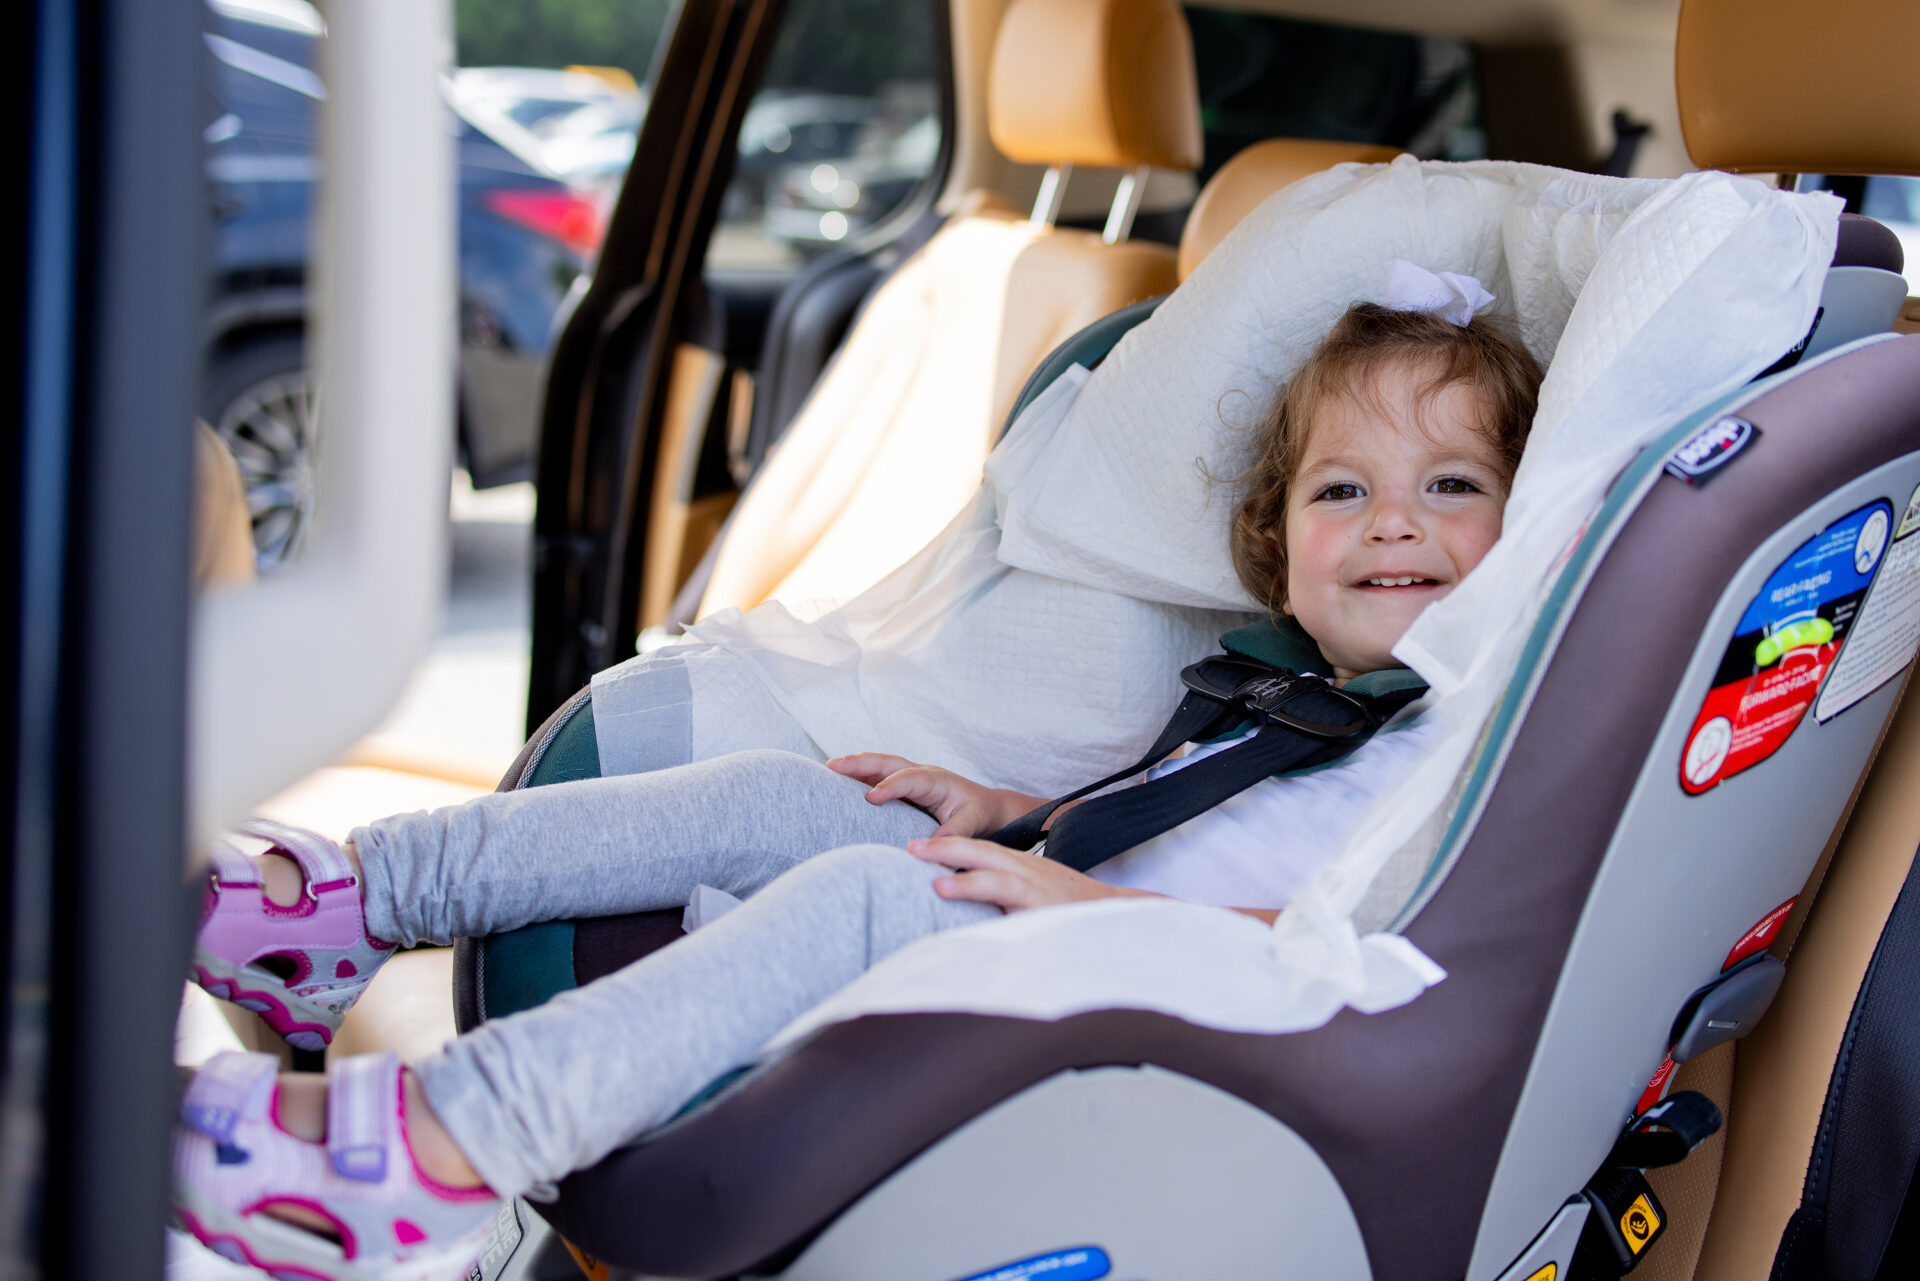 Disposable Liner for Automobile Child Safety Seats - Now in Captivating Blue and White!